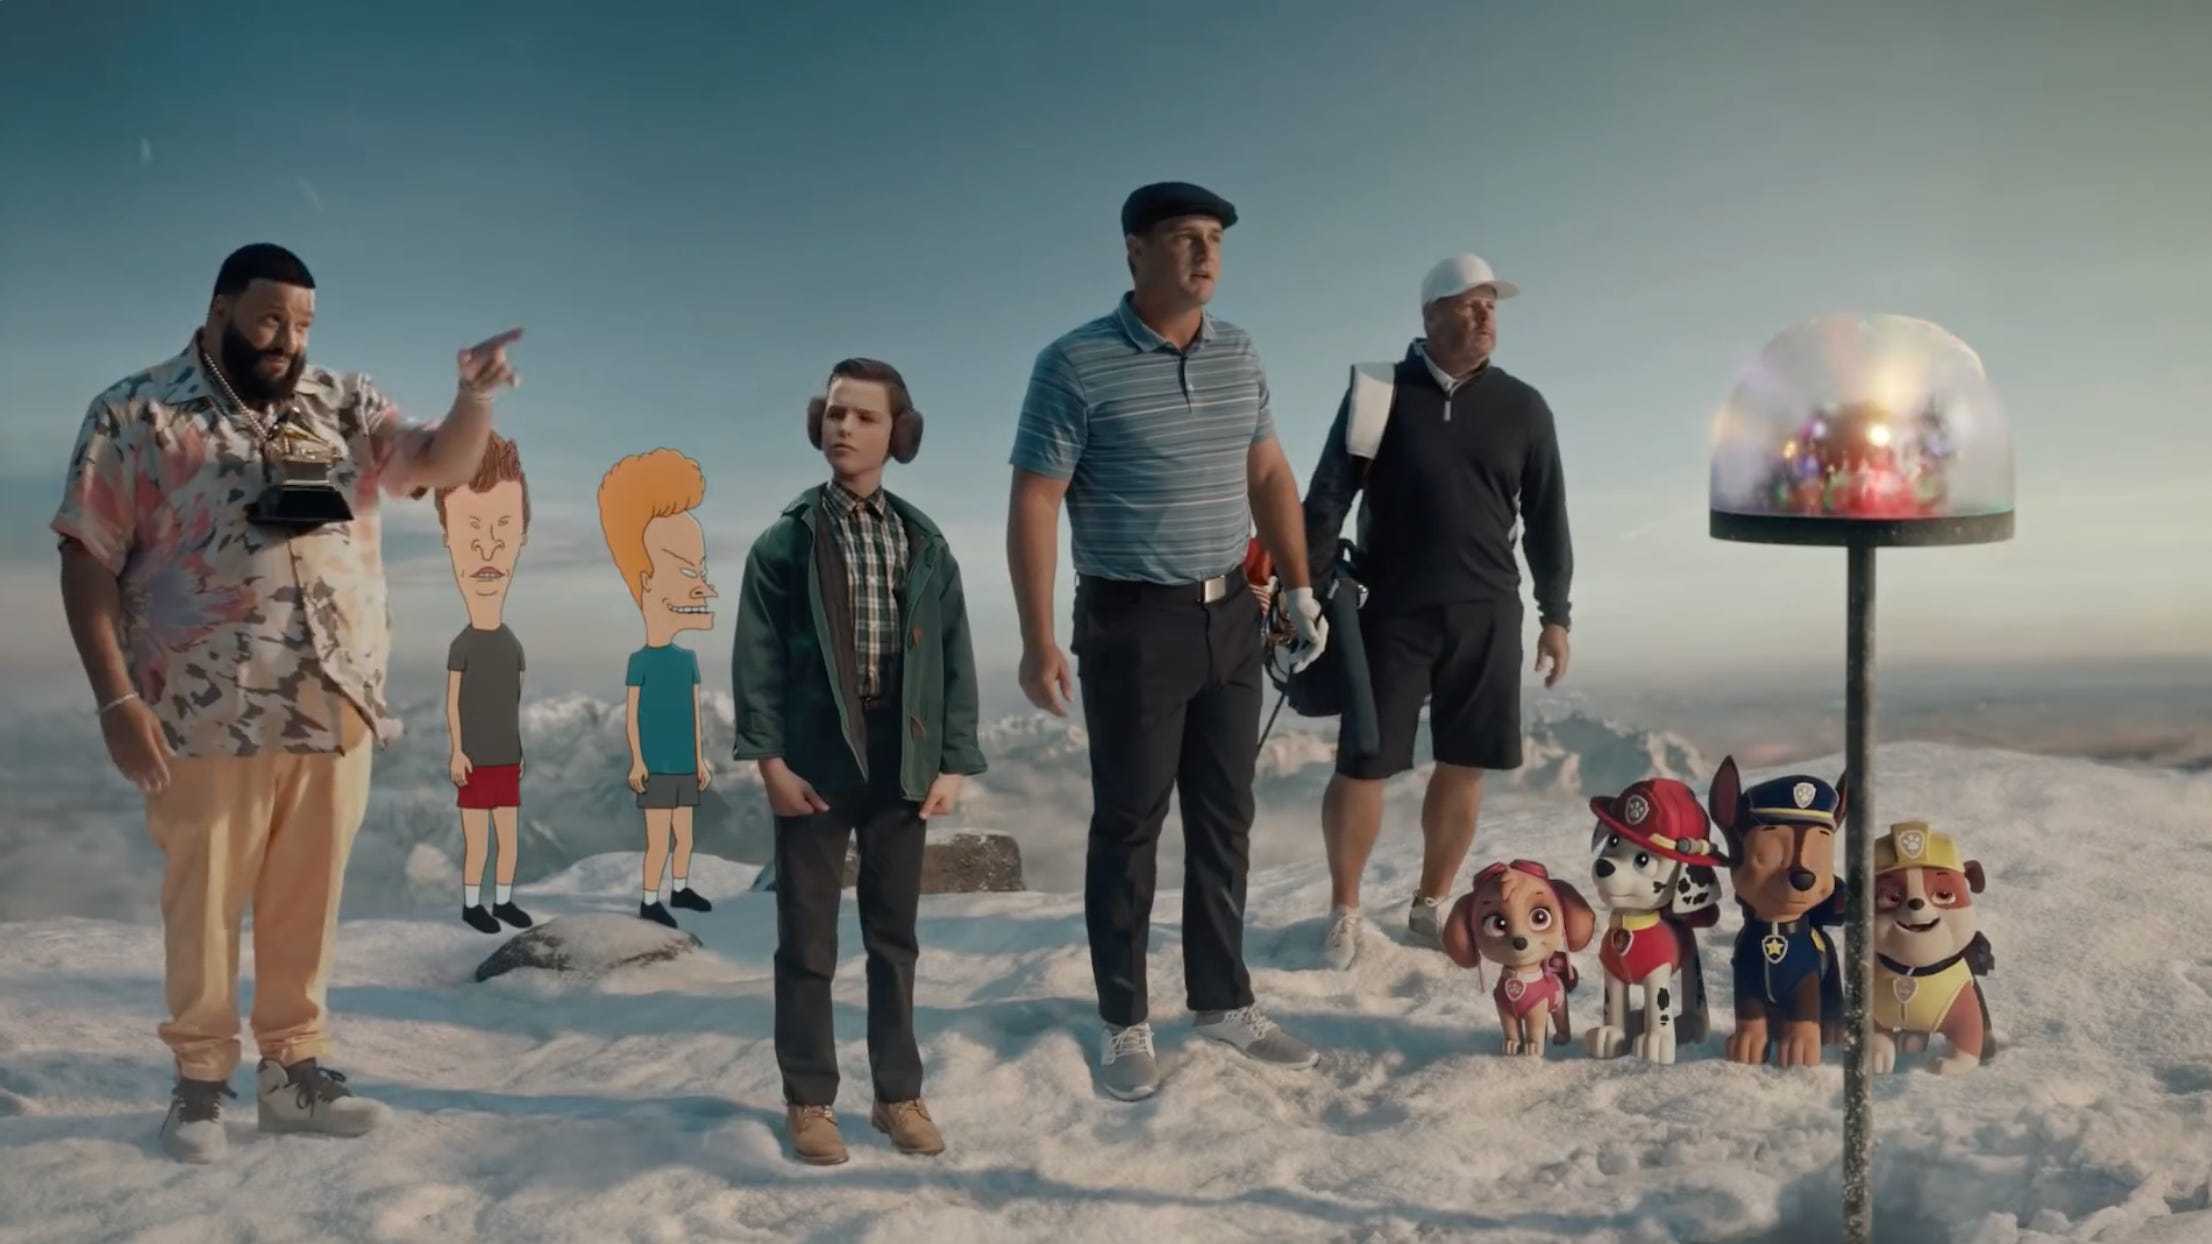 In the third of four ads, Paramount Plus gathers its stars on the top